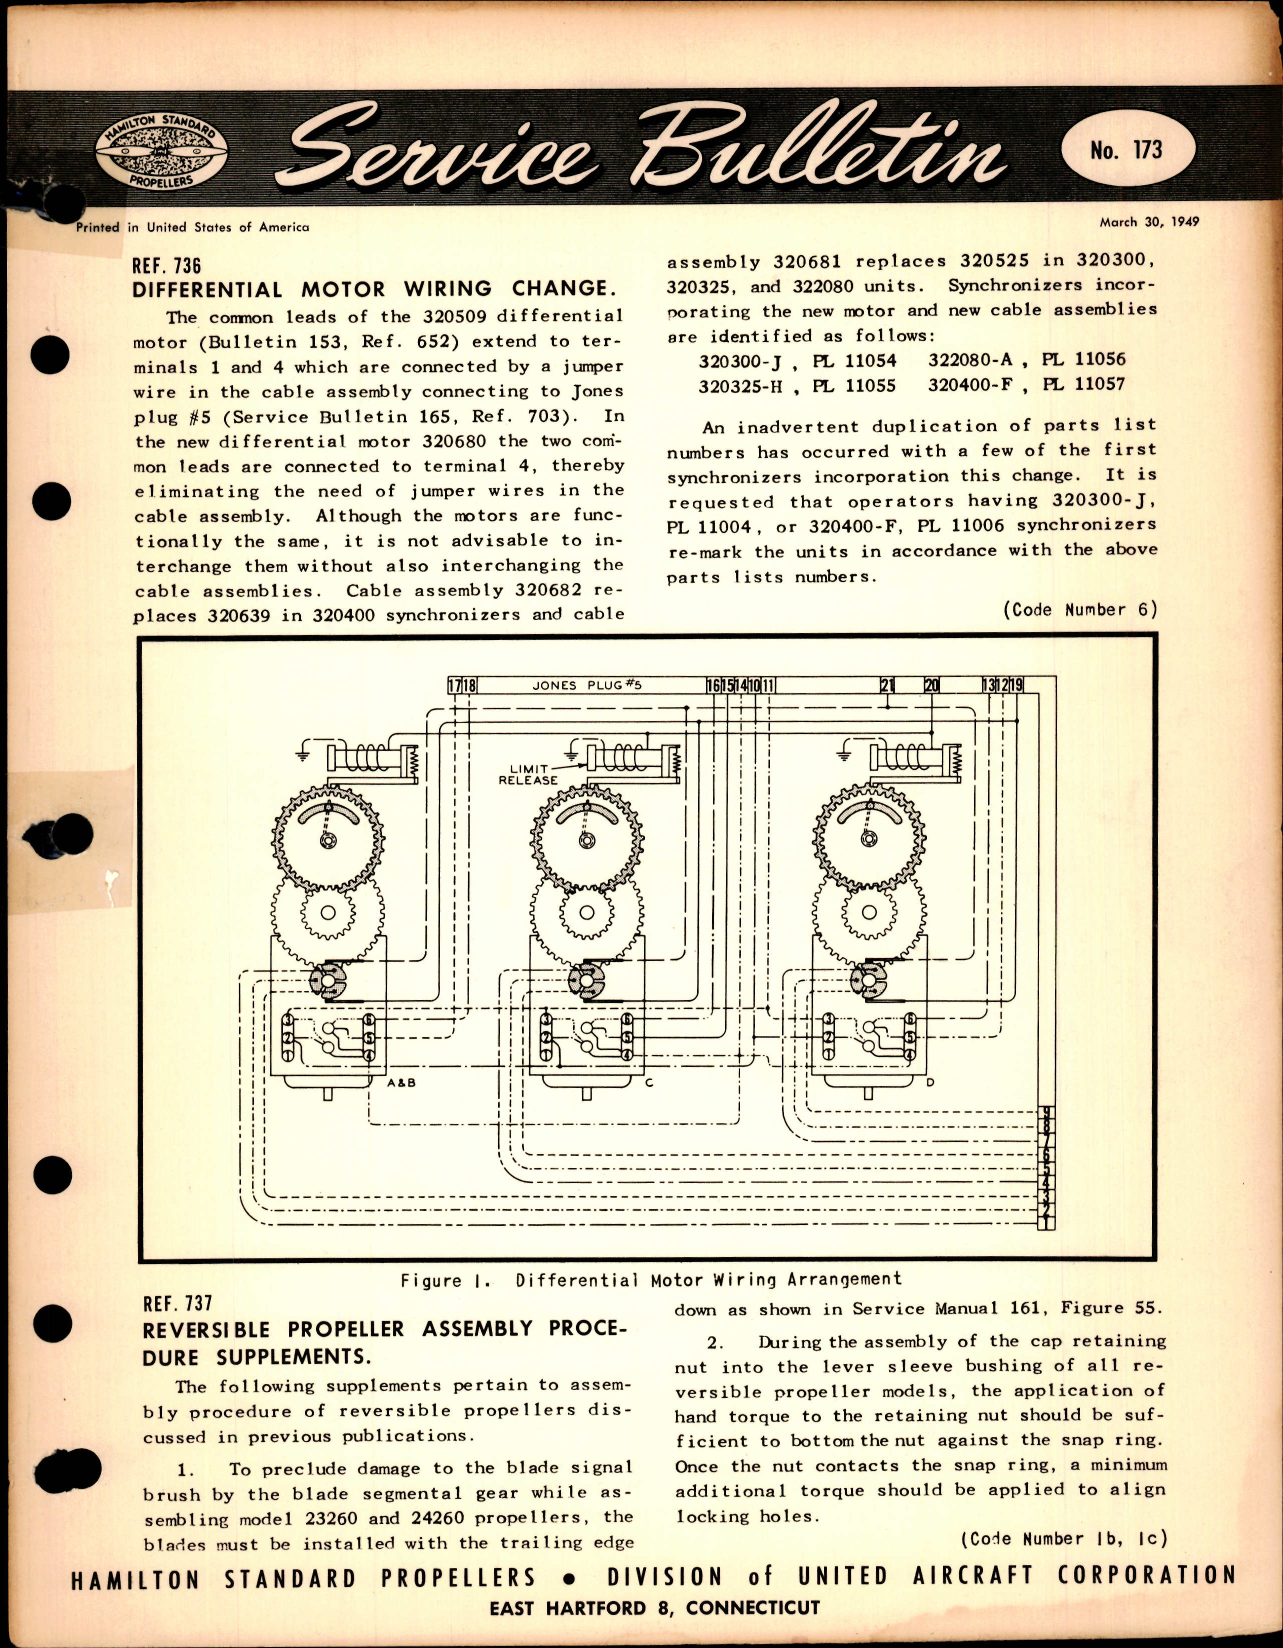 Sample page 1 from AirCorps Library document: Differential Motor Wiring Change, Ref 736